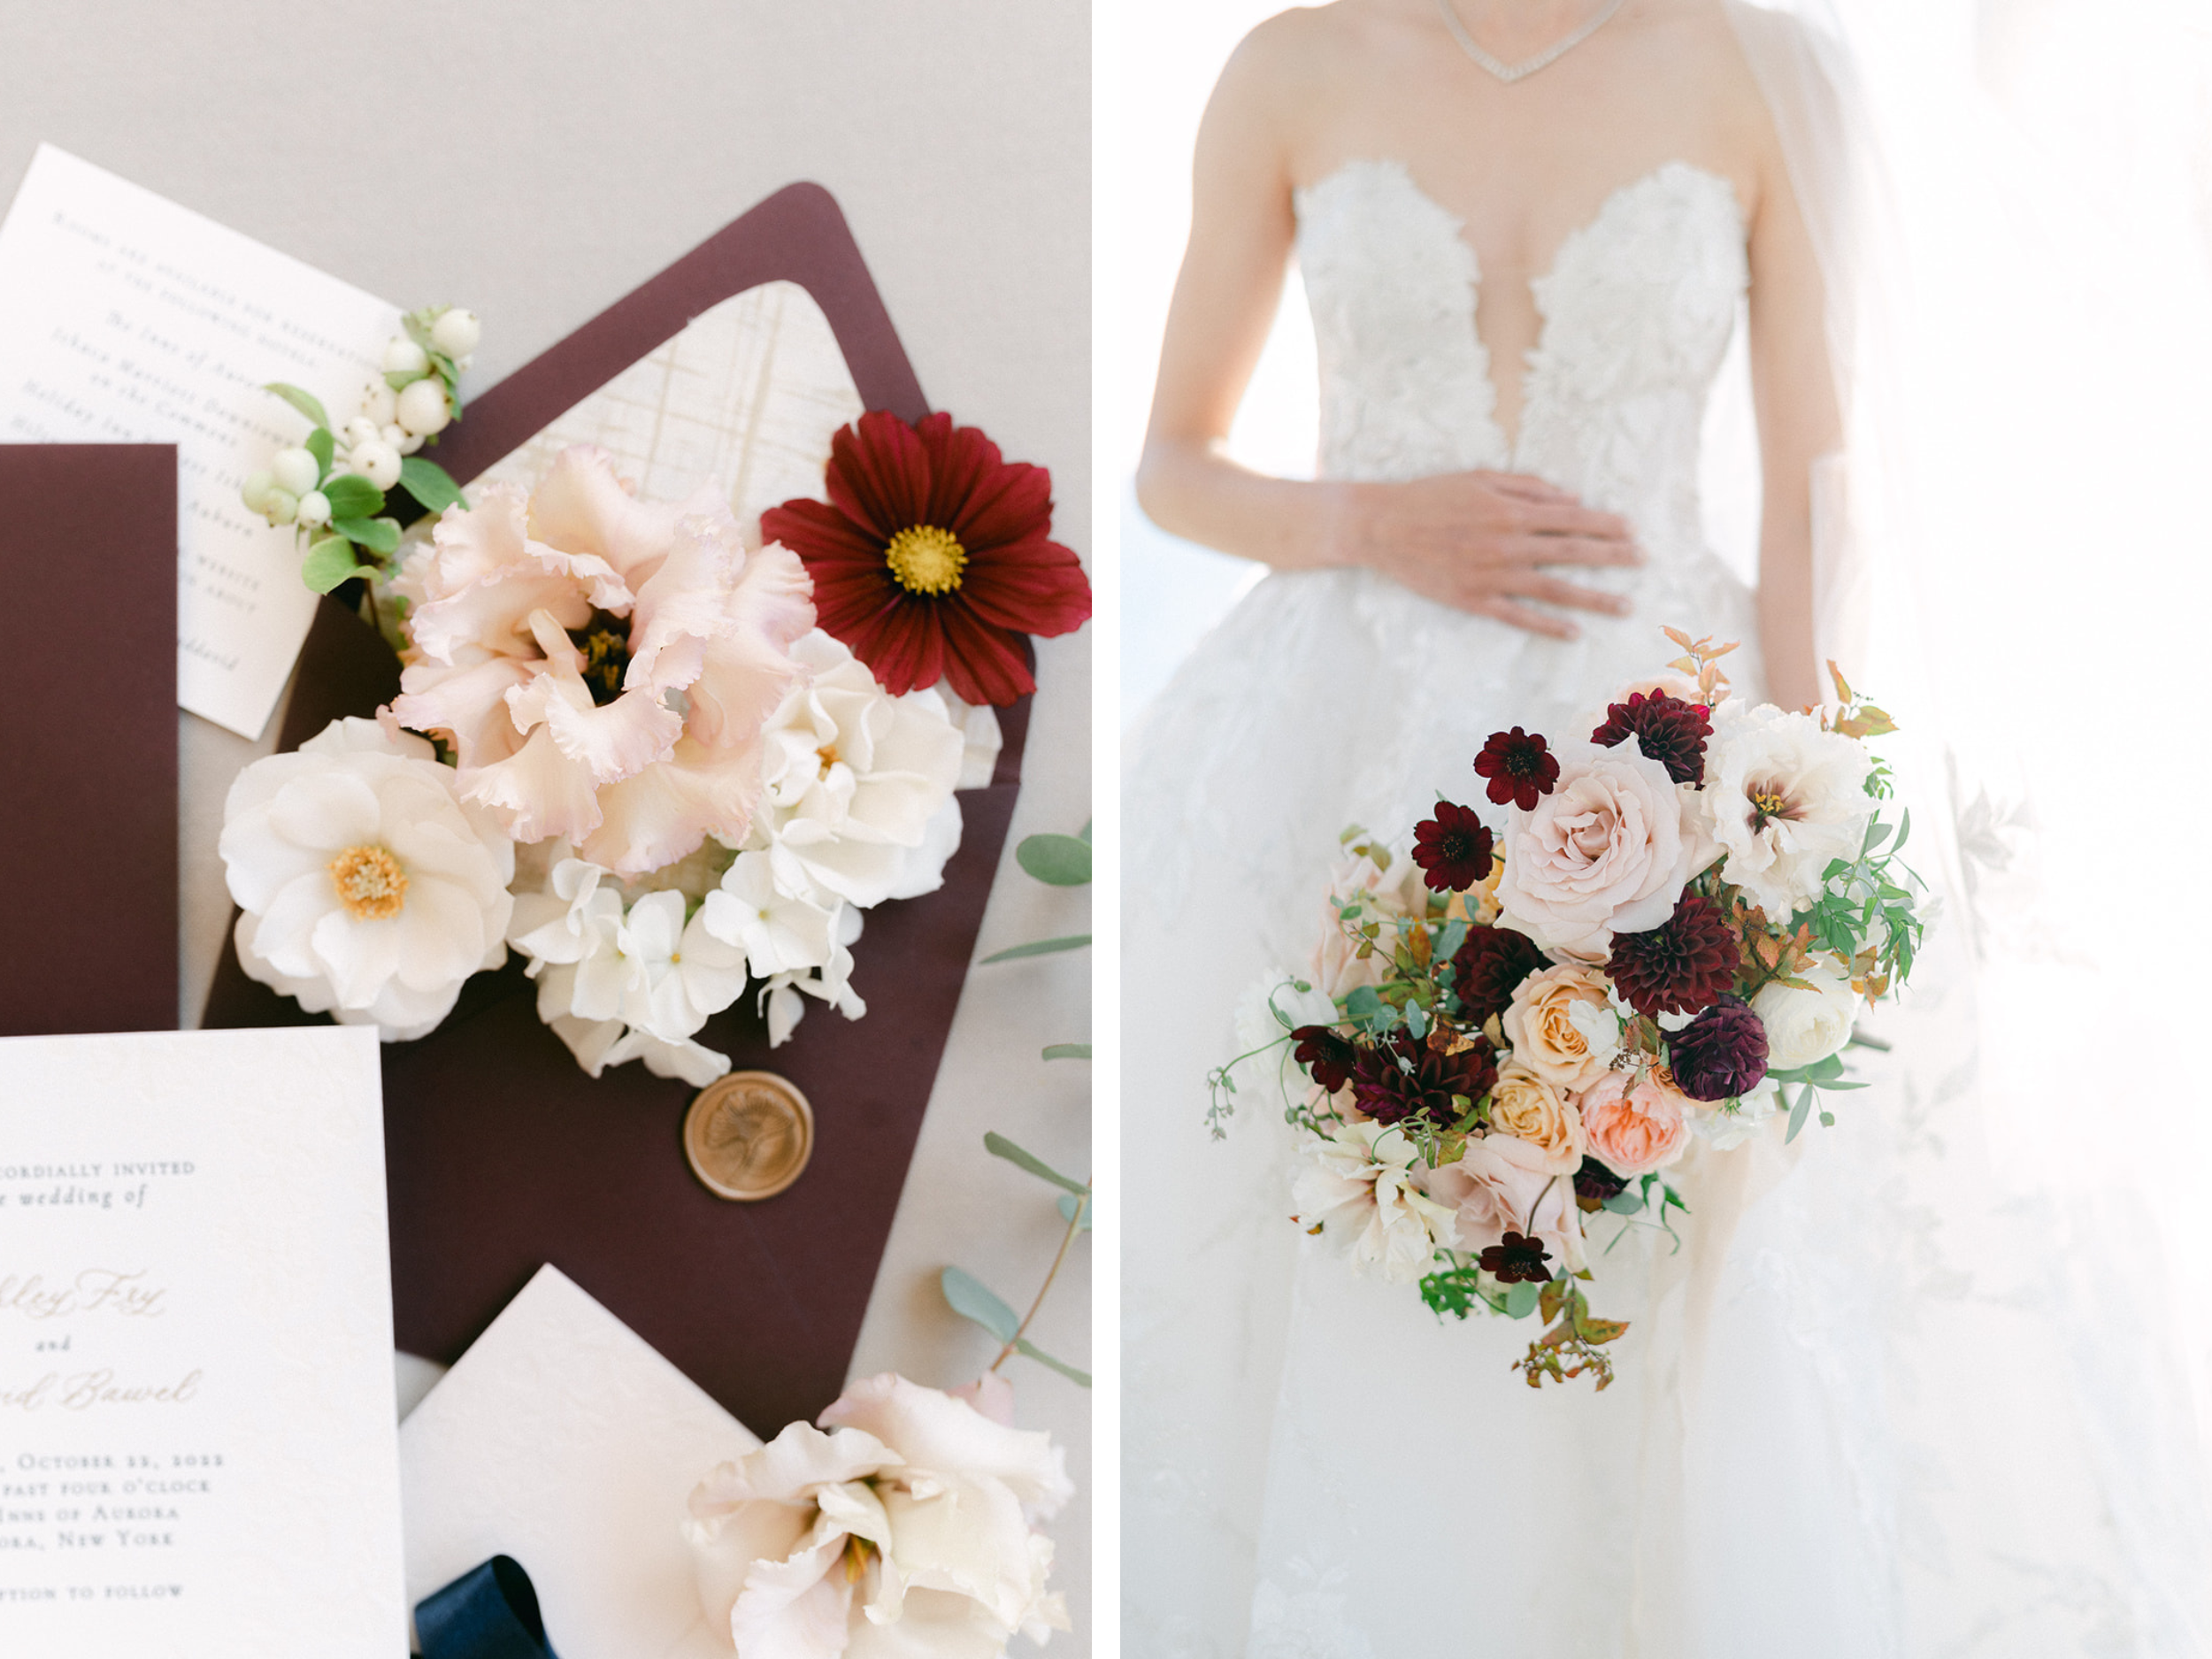 darker moodier wedding colors on trend for 2023